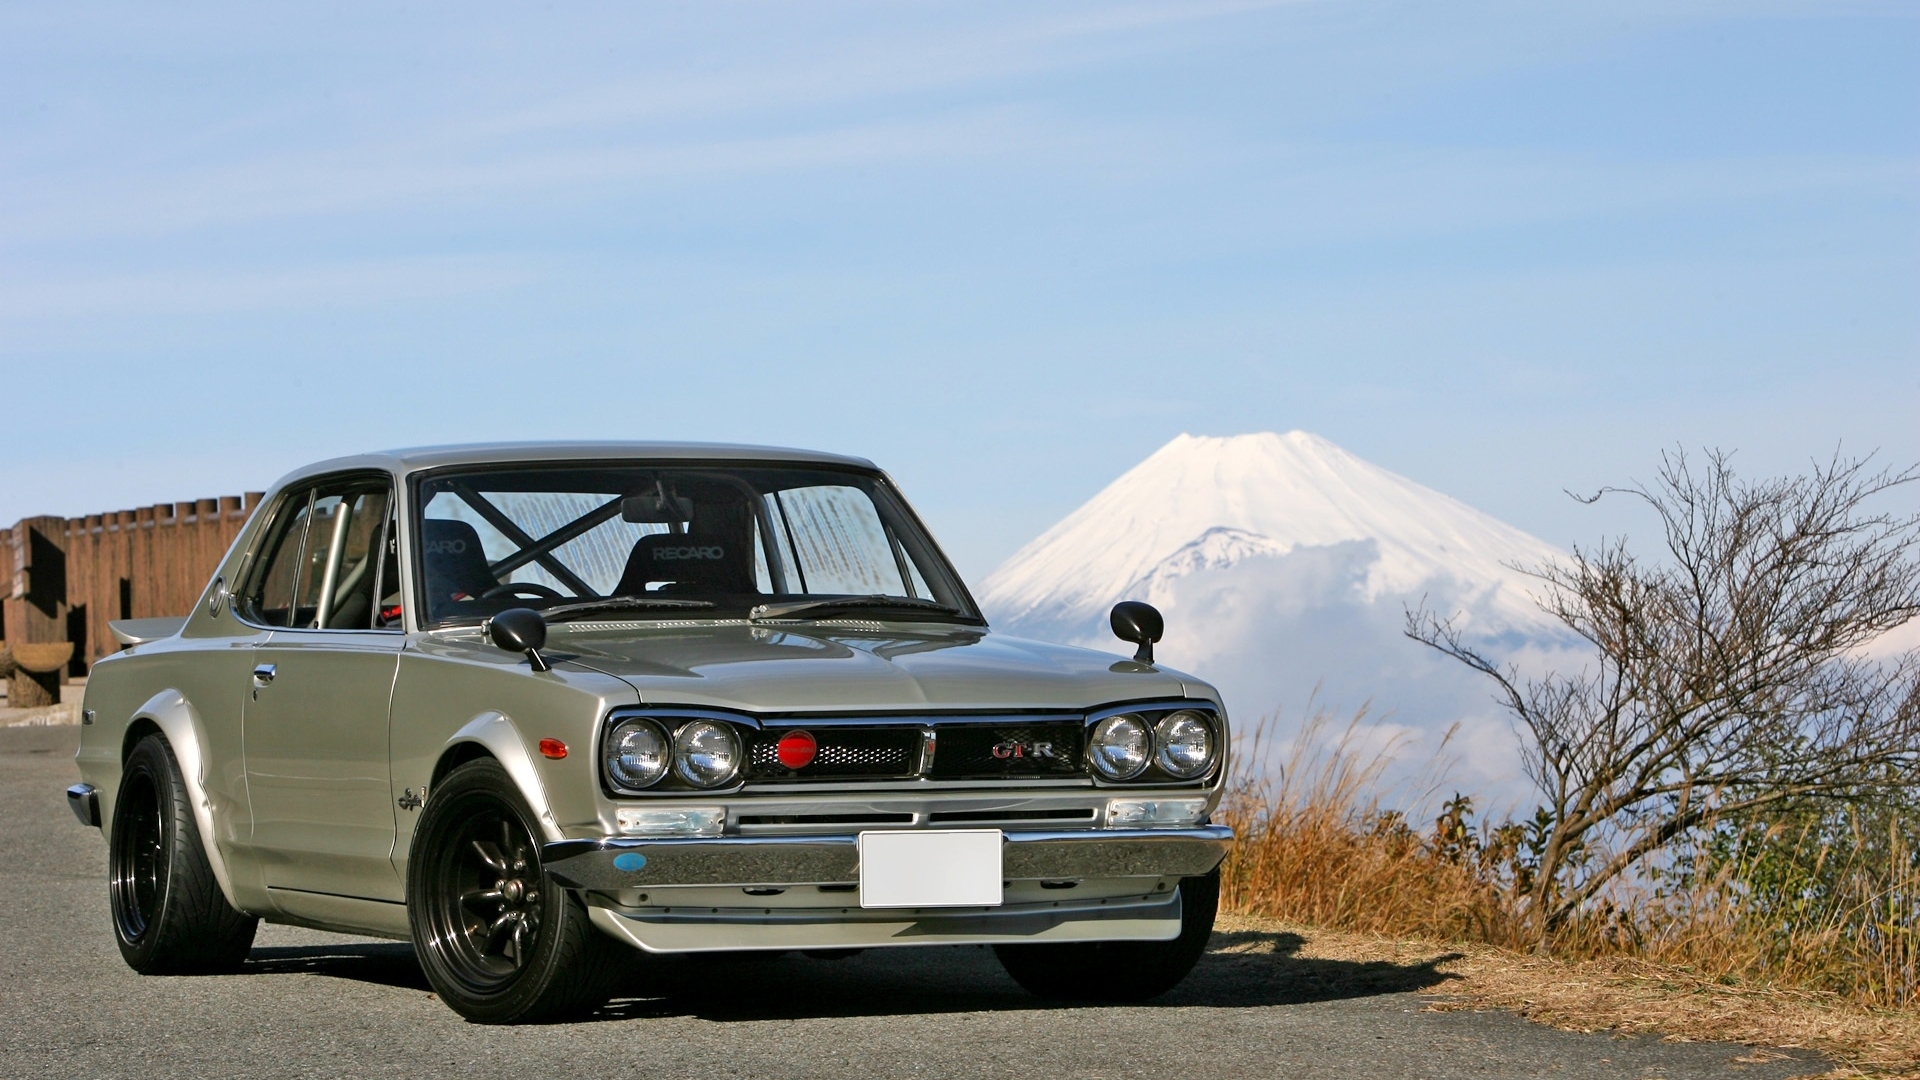 nissan, Skyline, Vehicles, Cars, Silver, Tuning Wallpaper